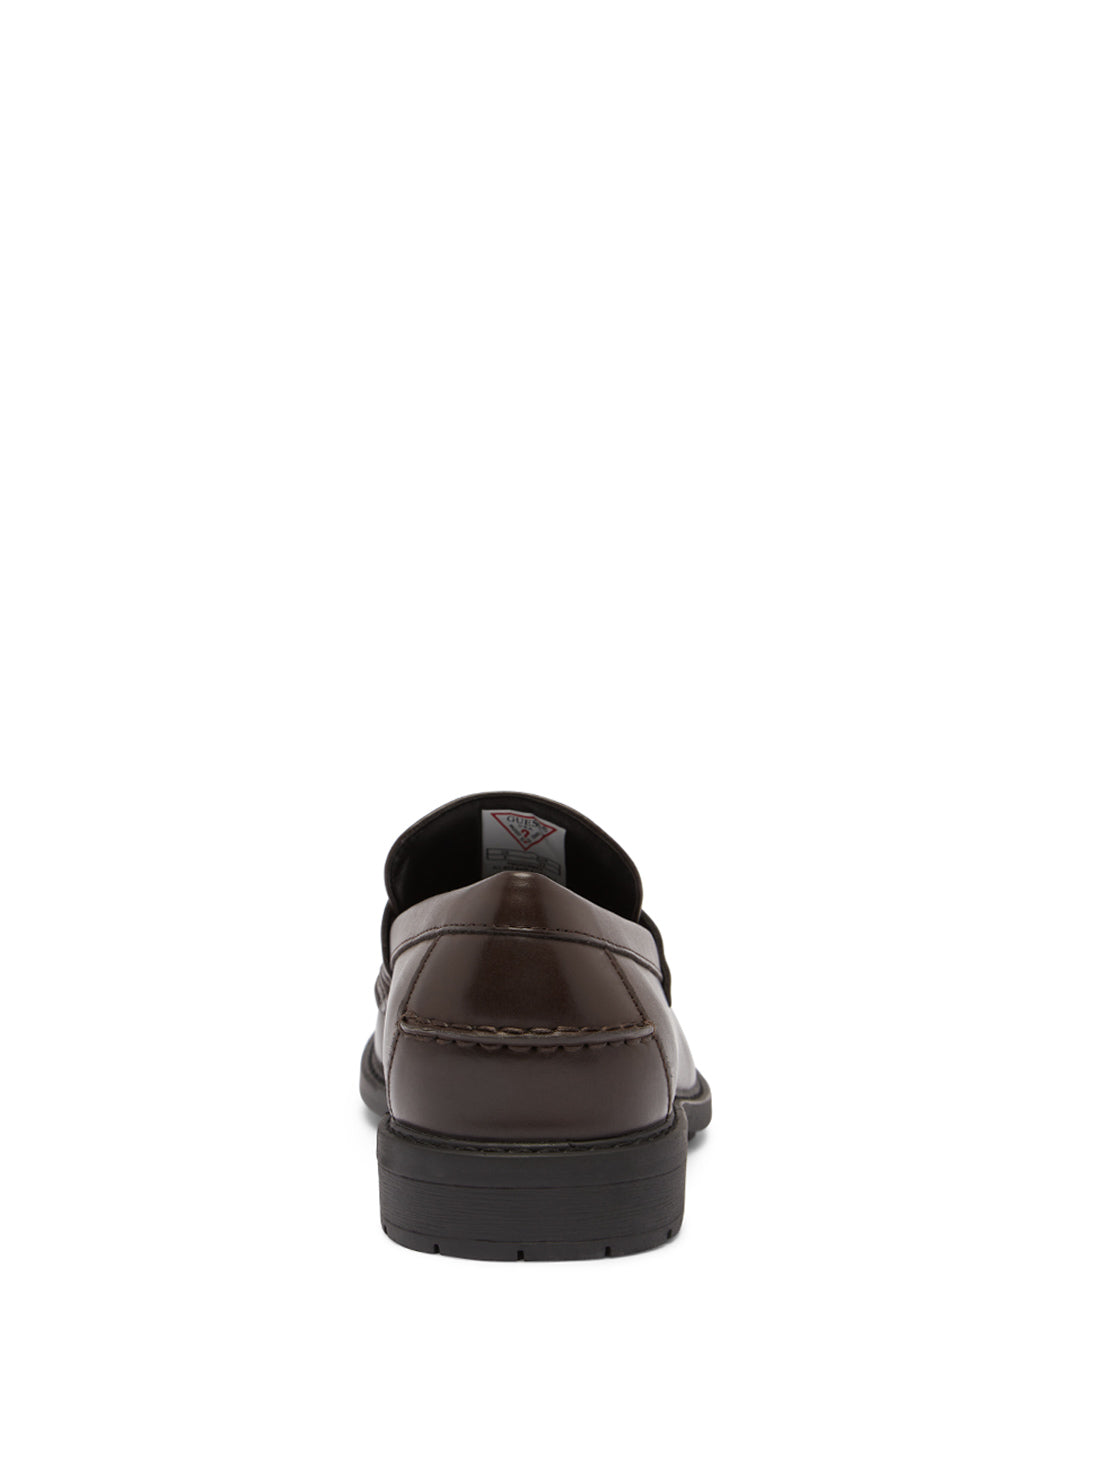 GUESS Brown Dremmer Loafers back view